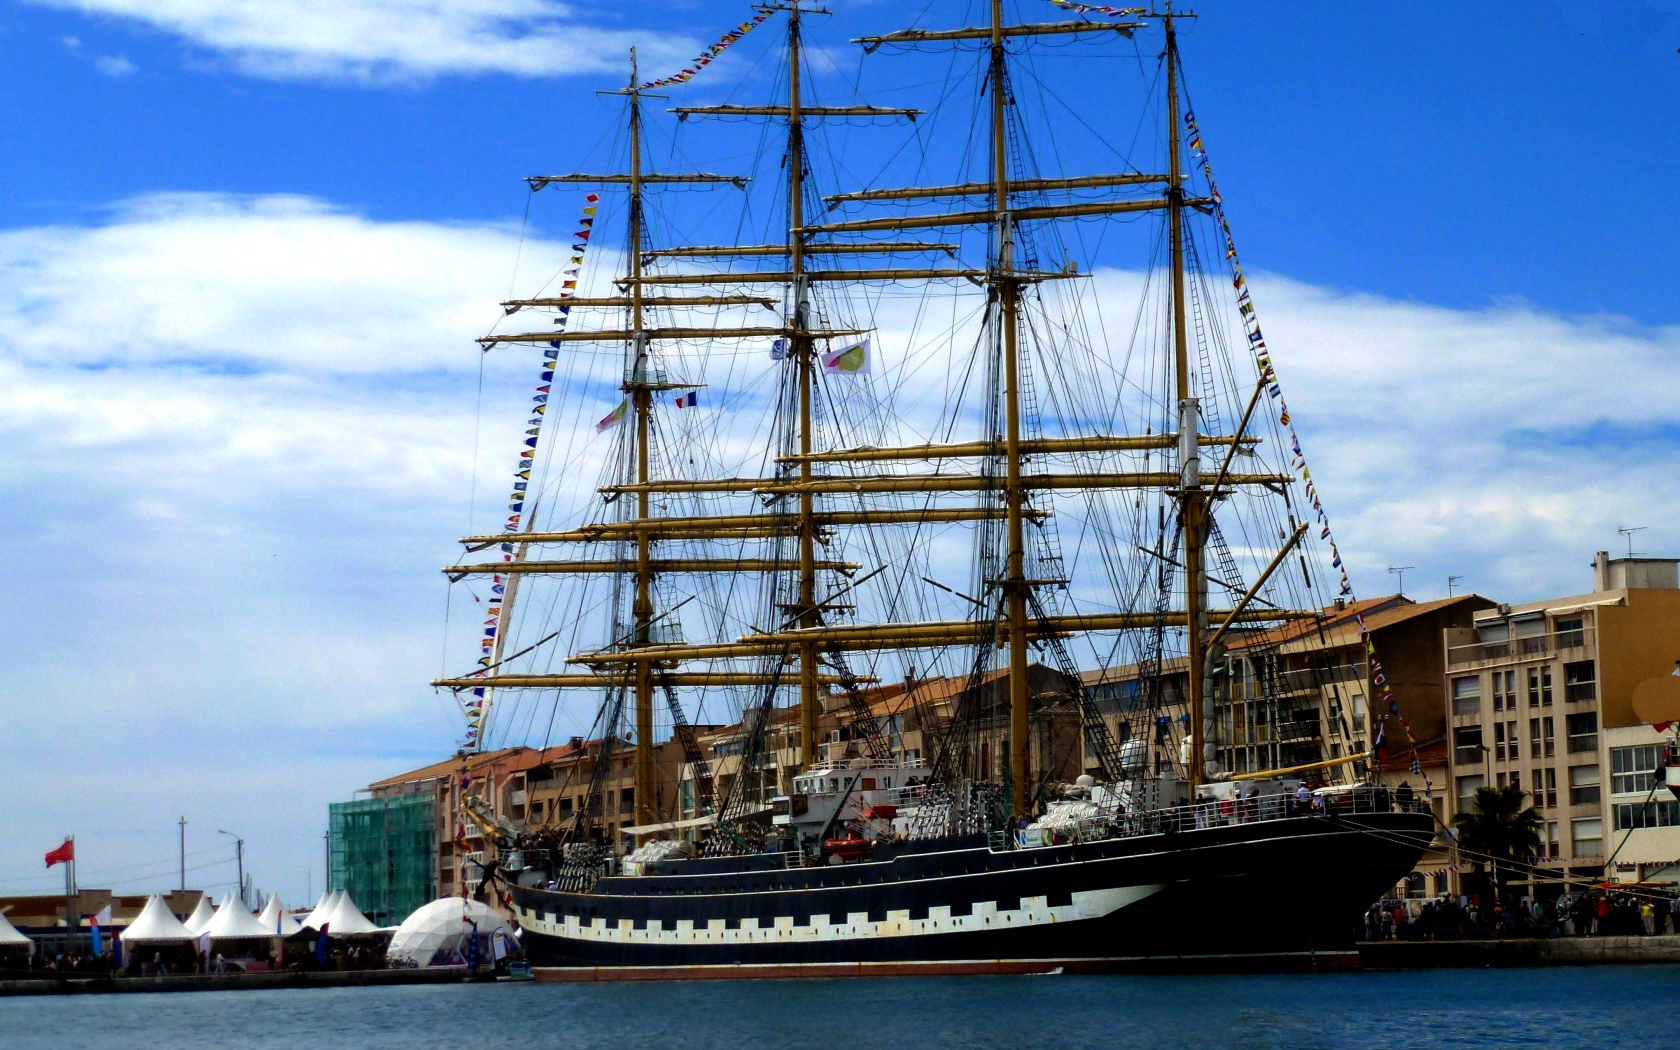 Large sailing frigate in the port against the sky